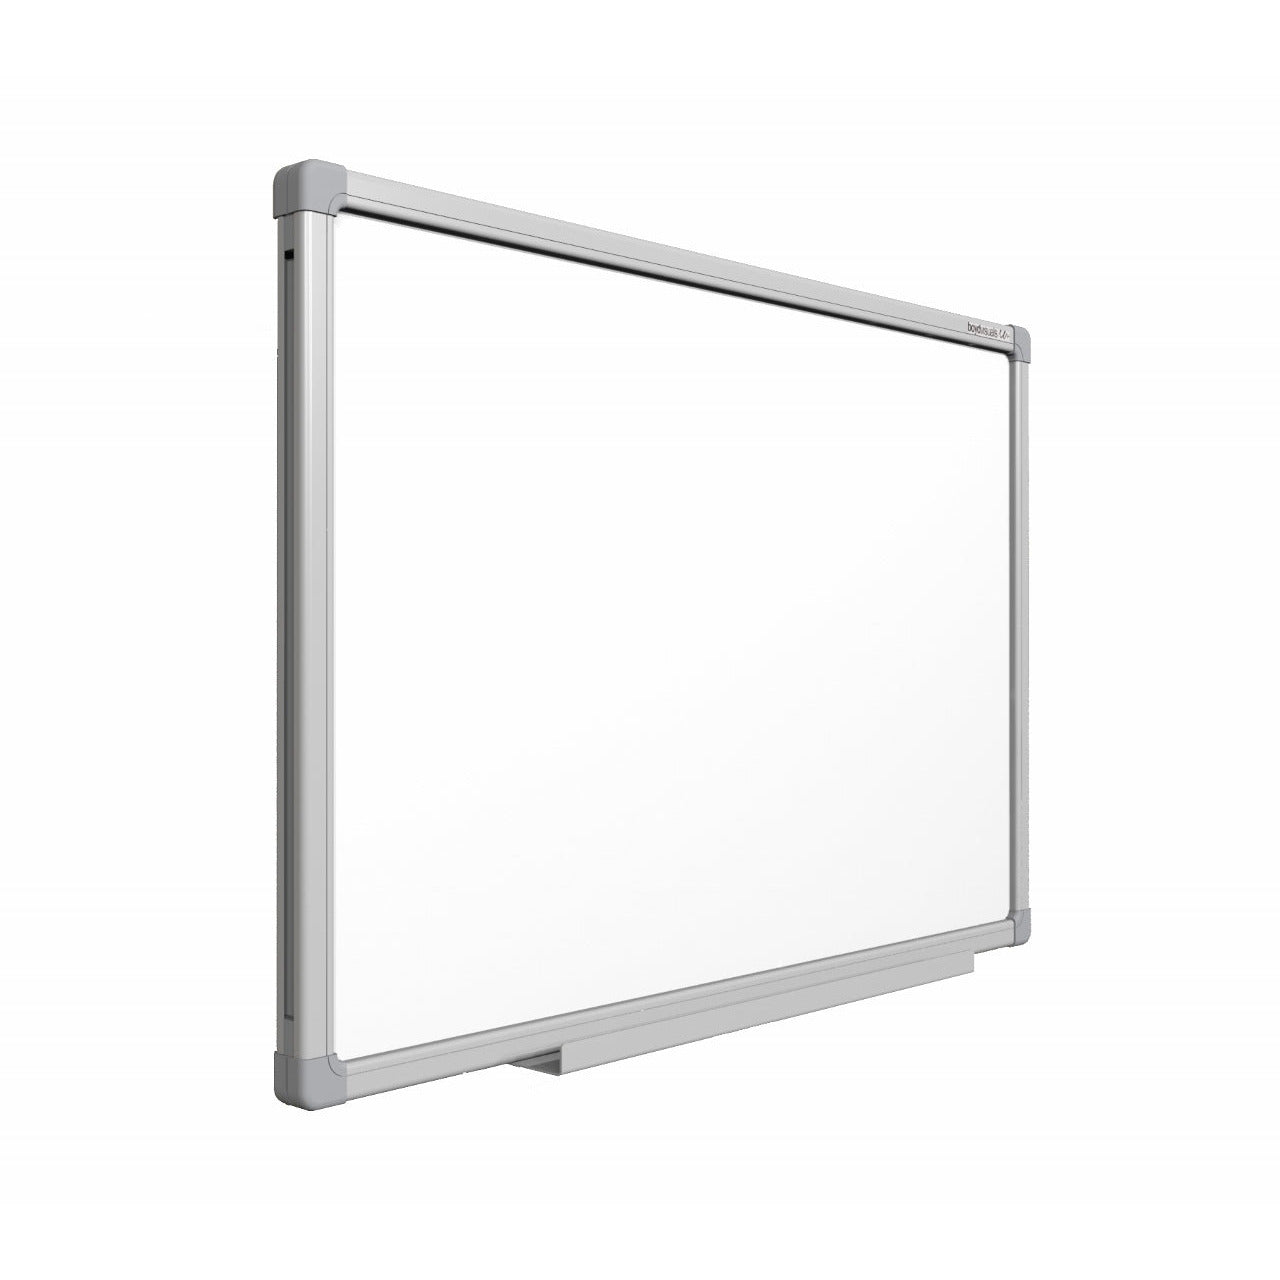 Projection Enhanced Whiteboard 1220 x 2400-Whiteboards and Visual Screens-Smart Office Furniture